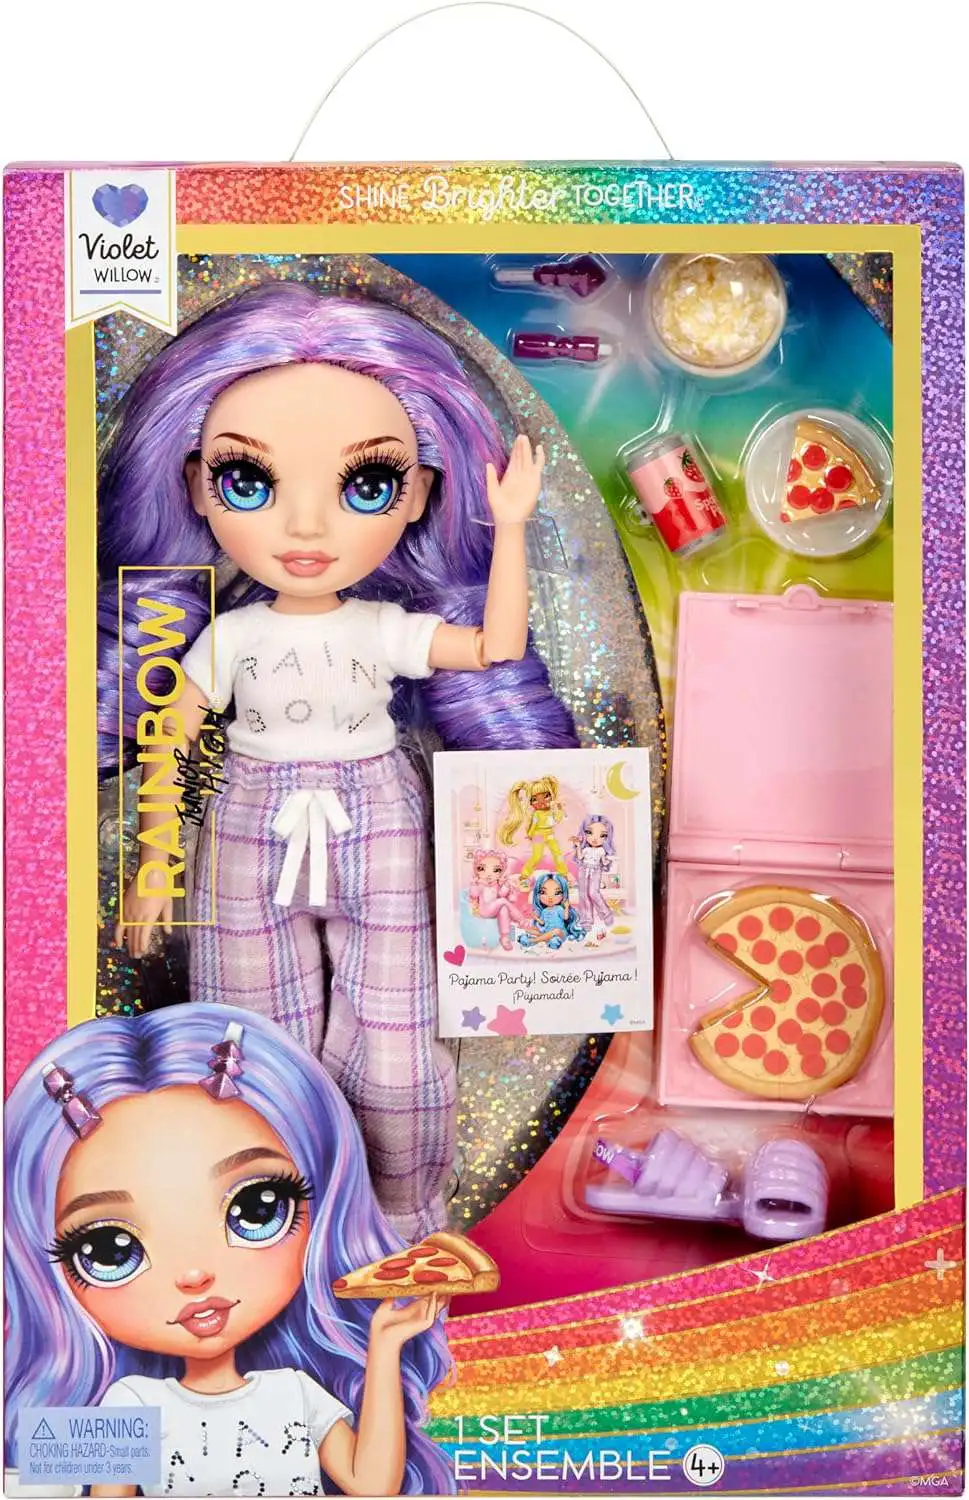 Rainbow Surprise High Violet Willow – Purple Fashion Doll with 2